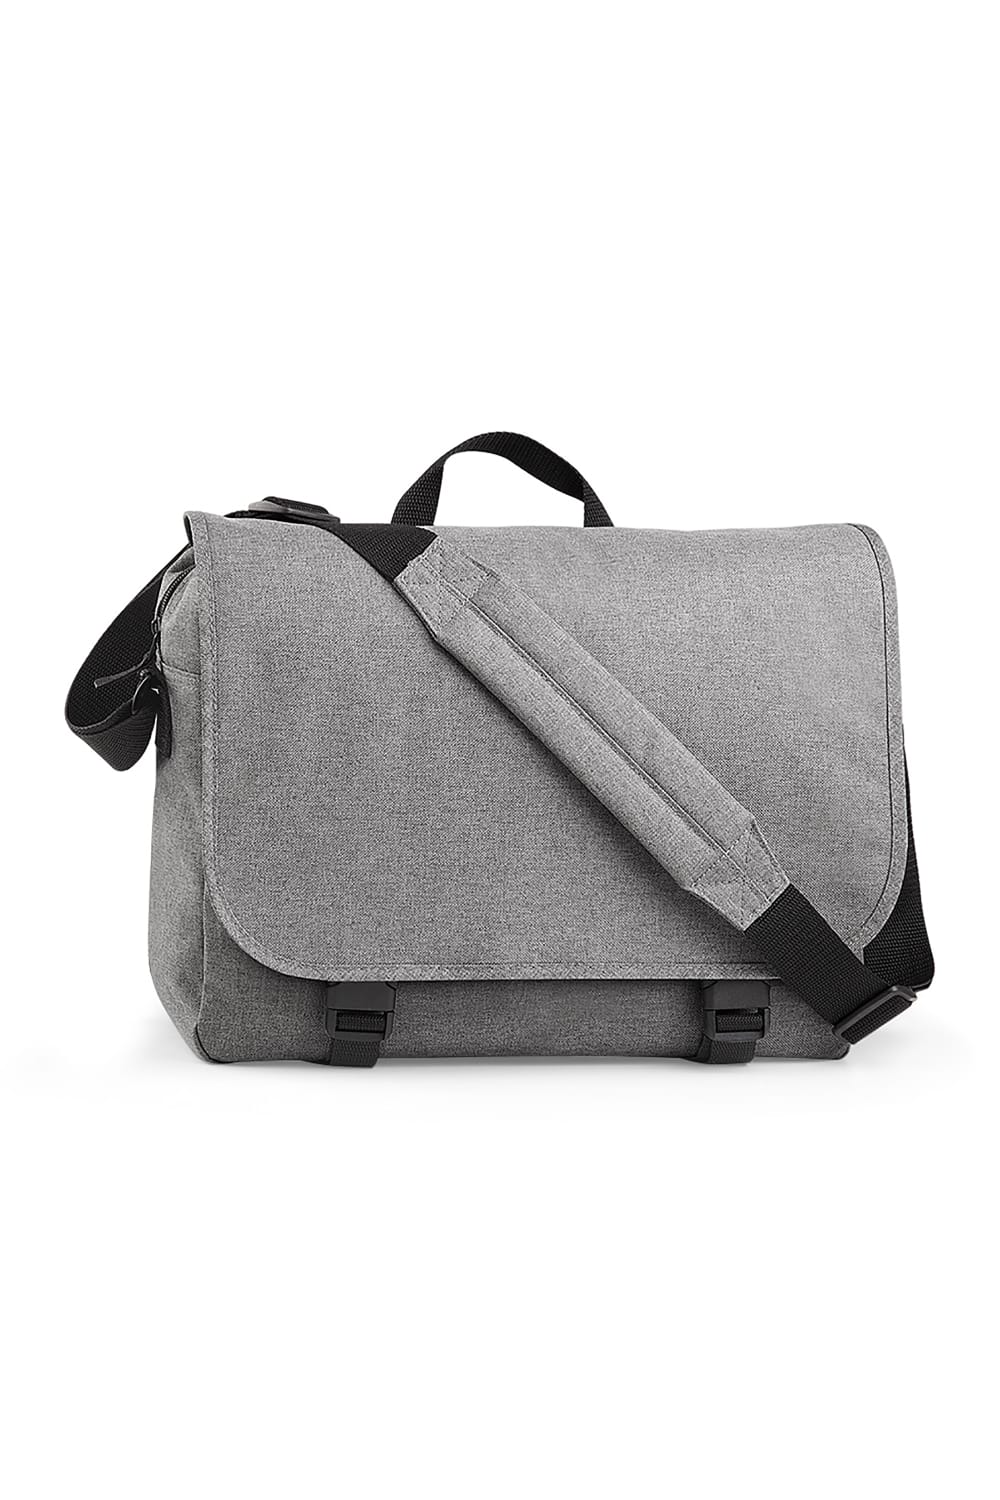 BagBase Two-tone Digital Messenger Bag (Up To 15.6inch Laptop Compartment) (Pack of 2) (Grey Marl) (One Size)